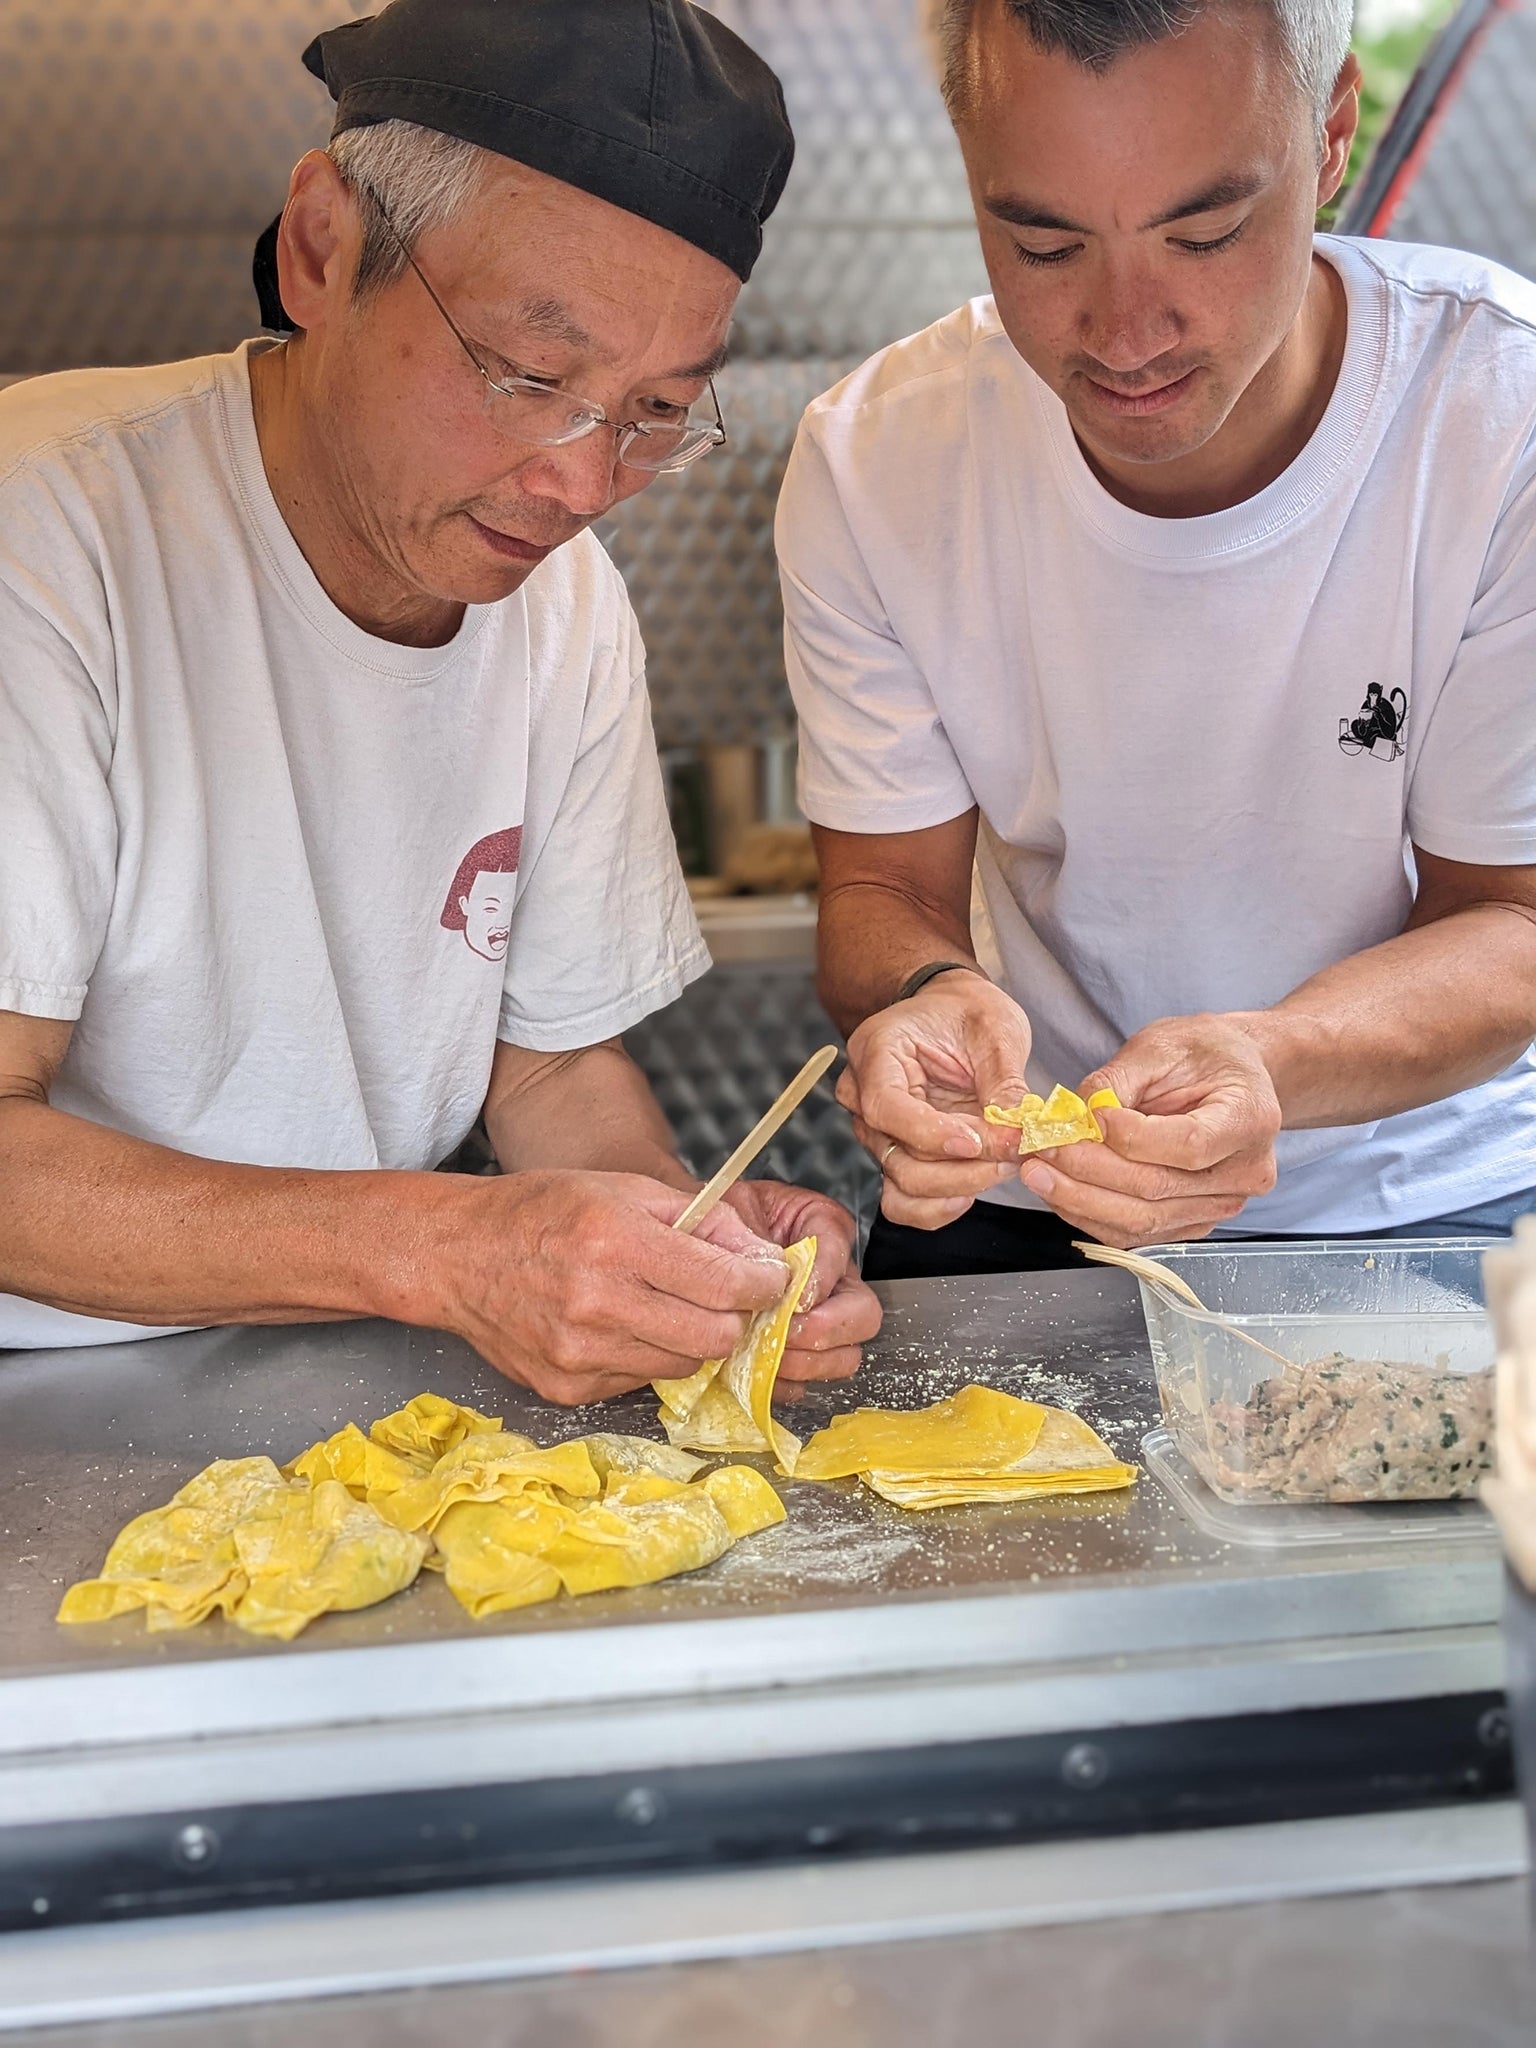 Yeung (R) and his father making wontons